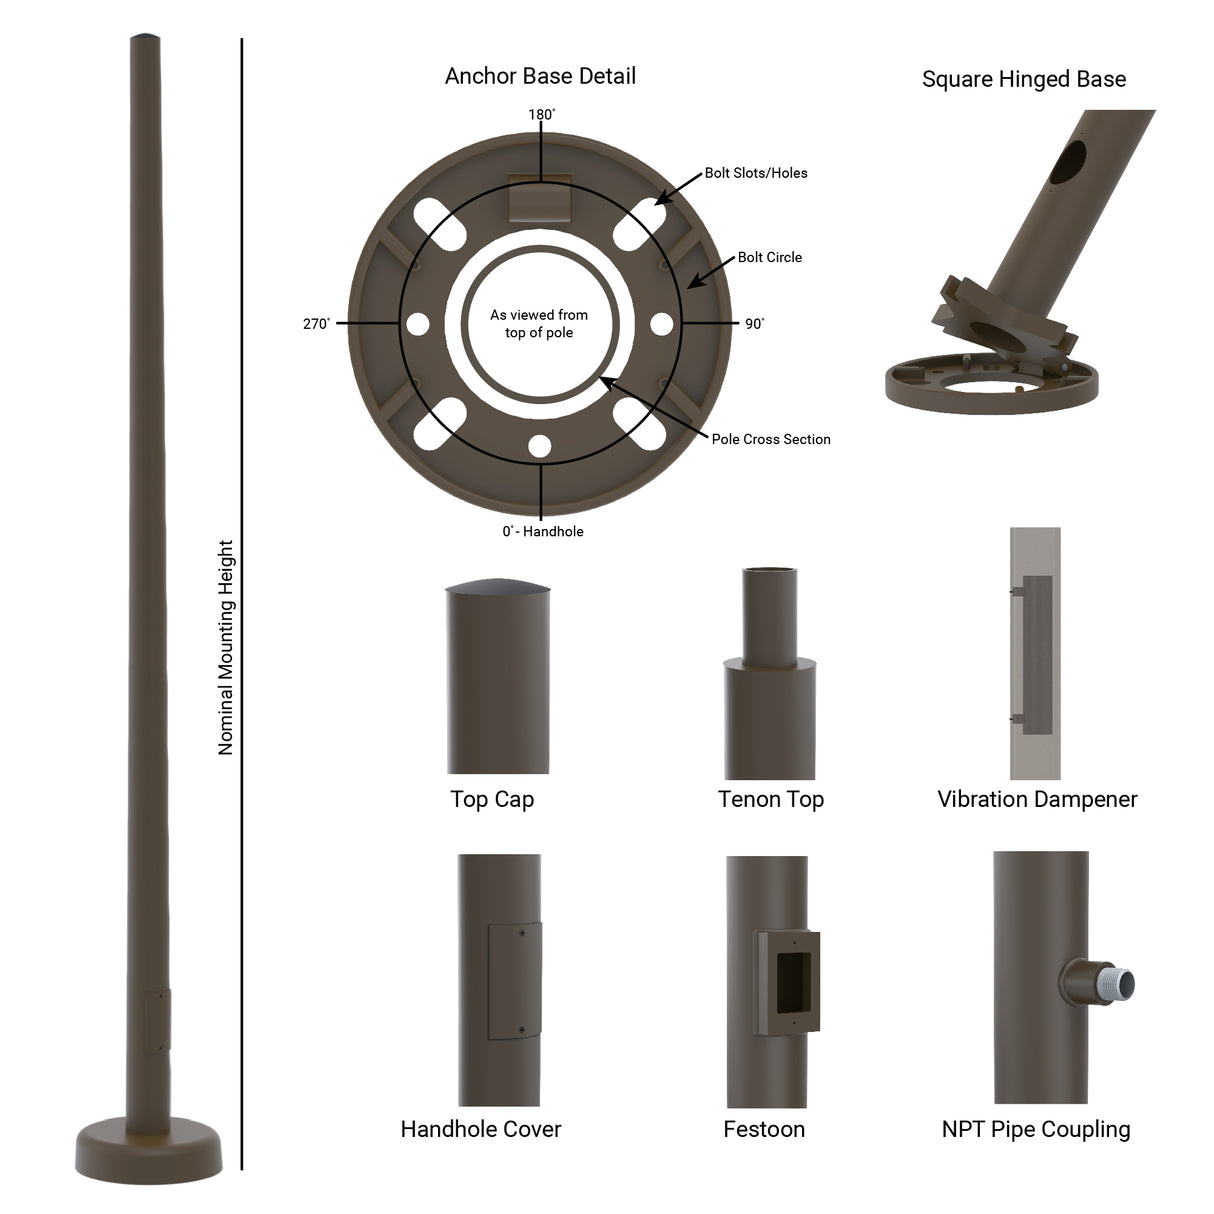 10' Tall x 4.0" Base OD x 3.0" Top OD x 0.125" Thick, Round Tapered Aluminum, Hinged Anchor Base Light Pole